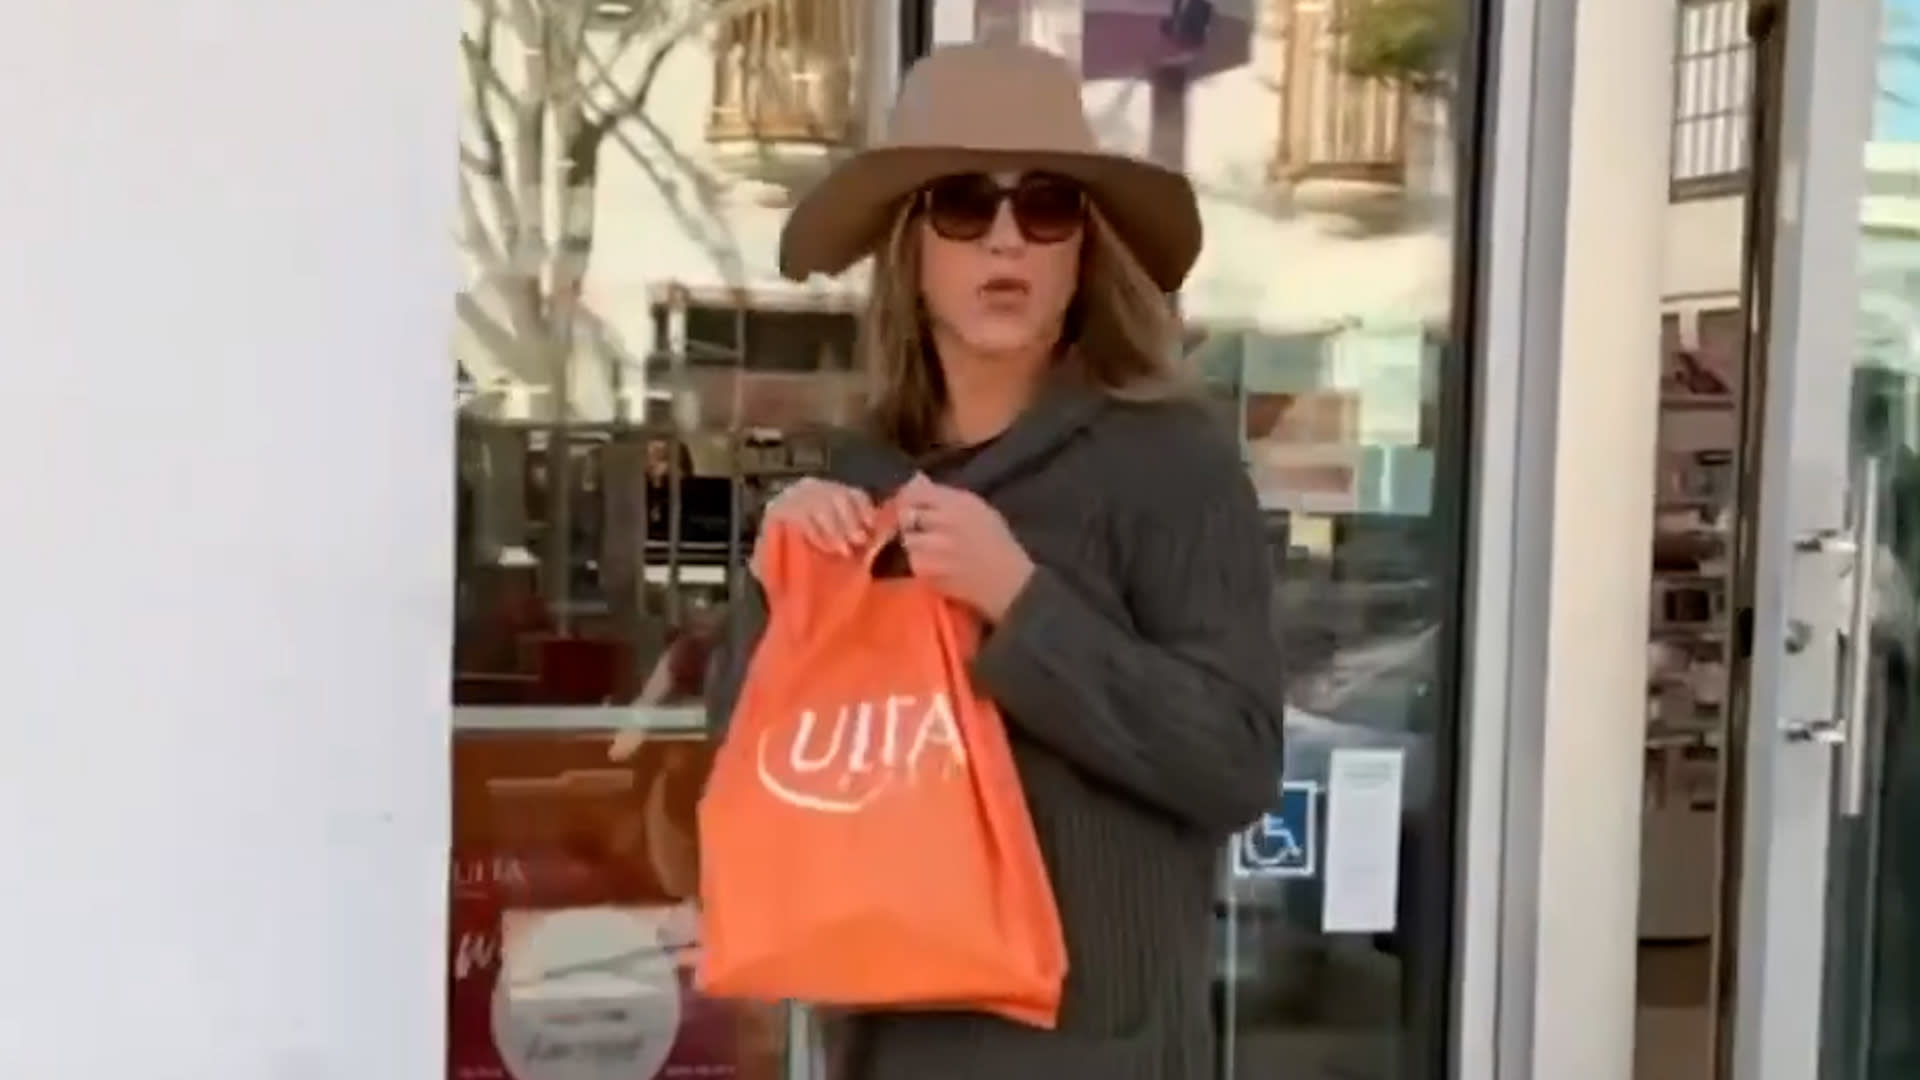 Jennifer Aniston Sneaks Into Store Wearing a Disguise and Gets